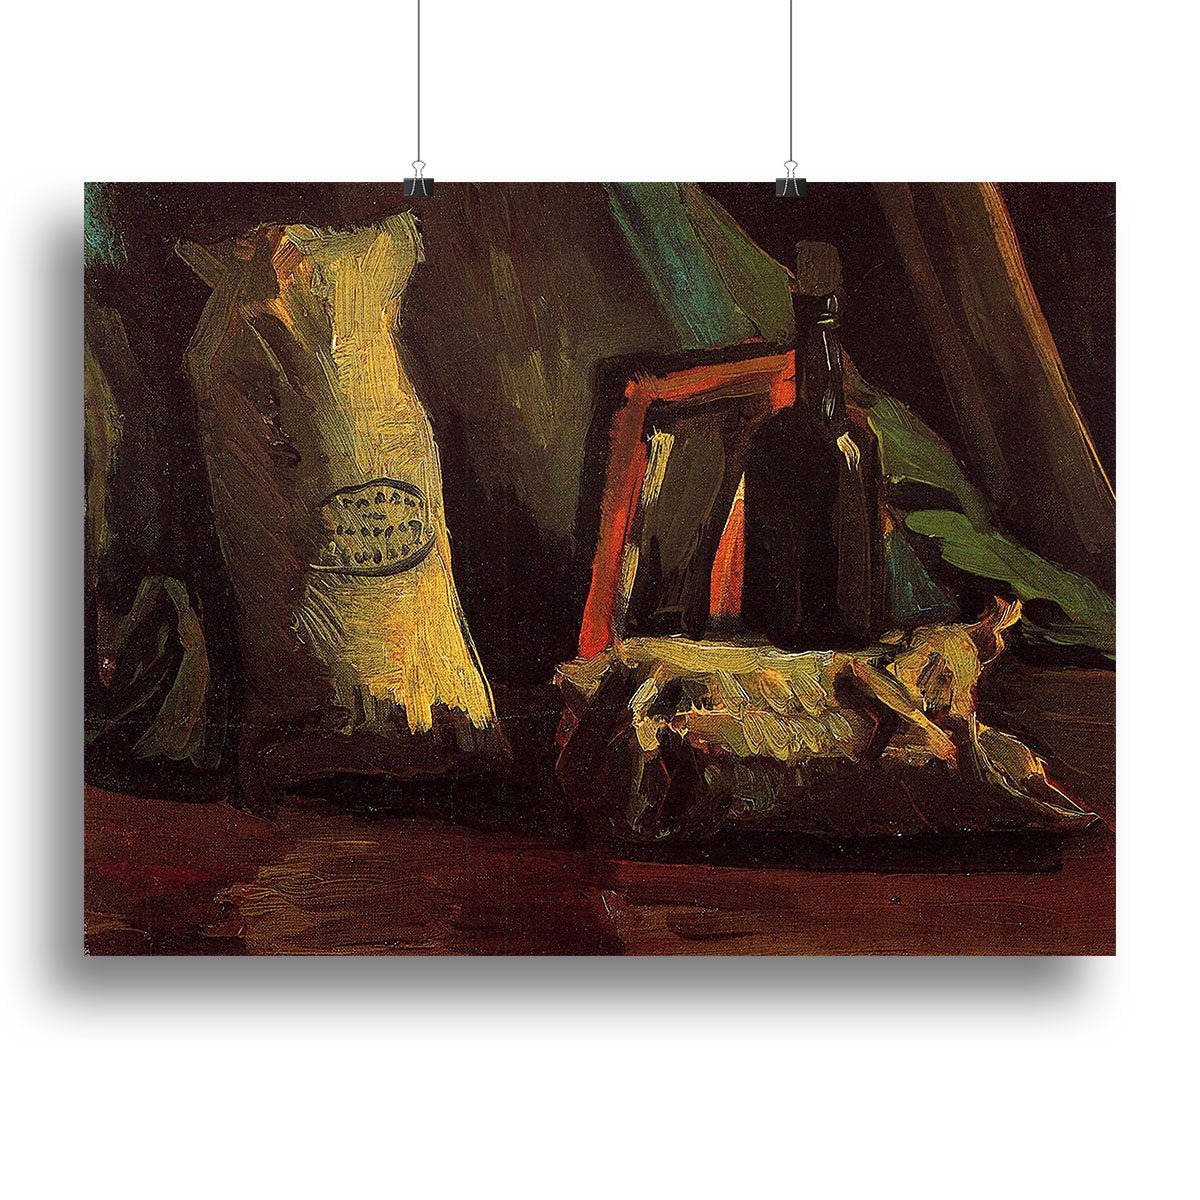 Still Life with Two Sacks and a Bottl by Van Gogh Canvas Print or Poster